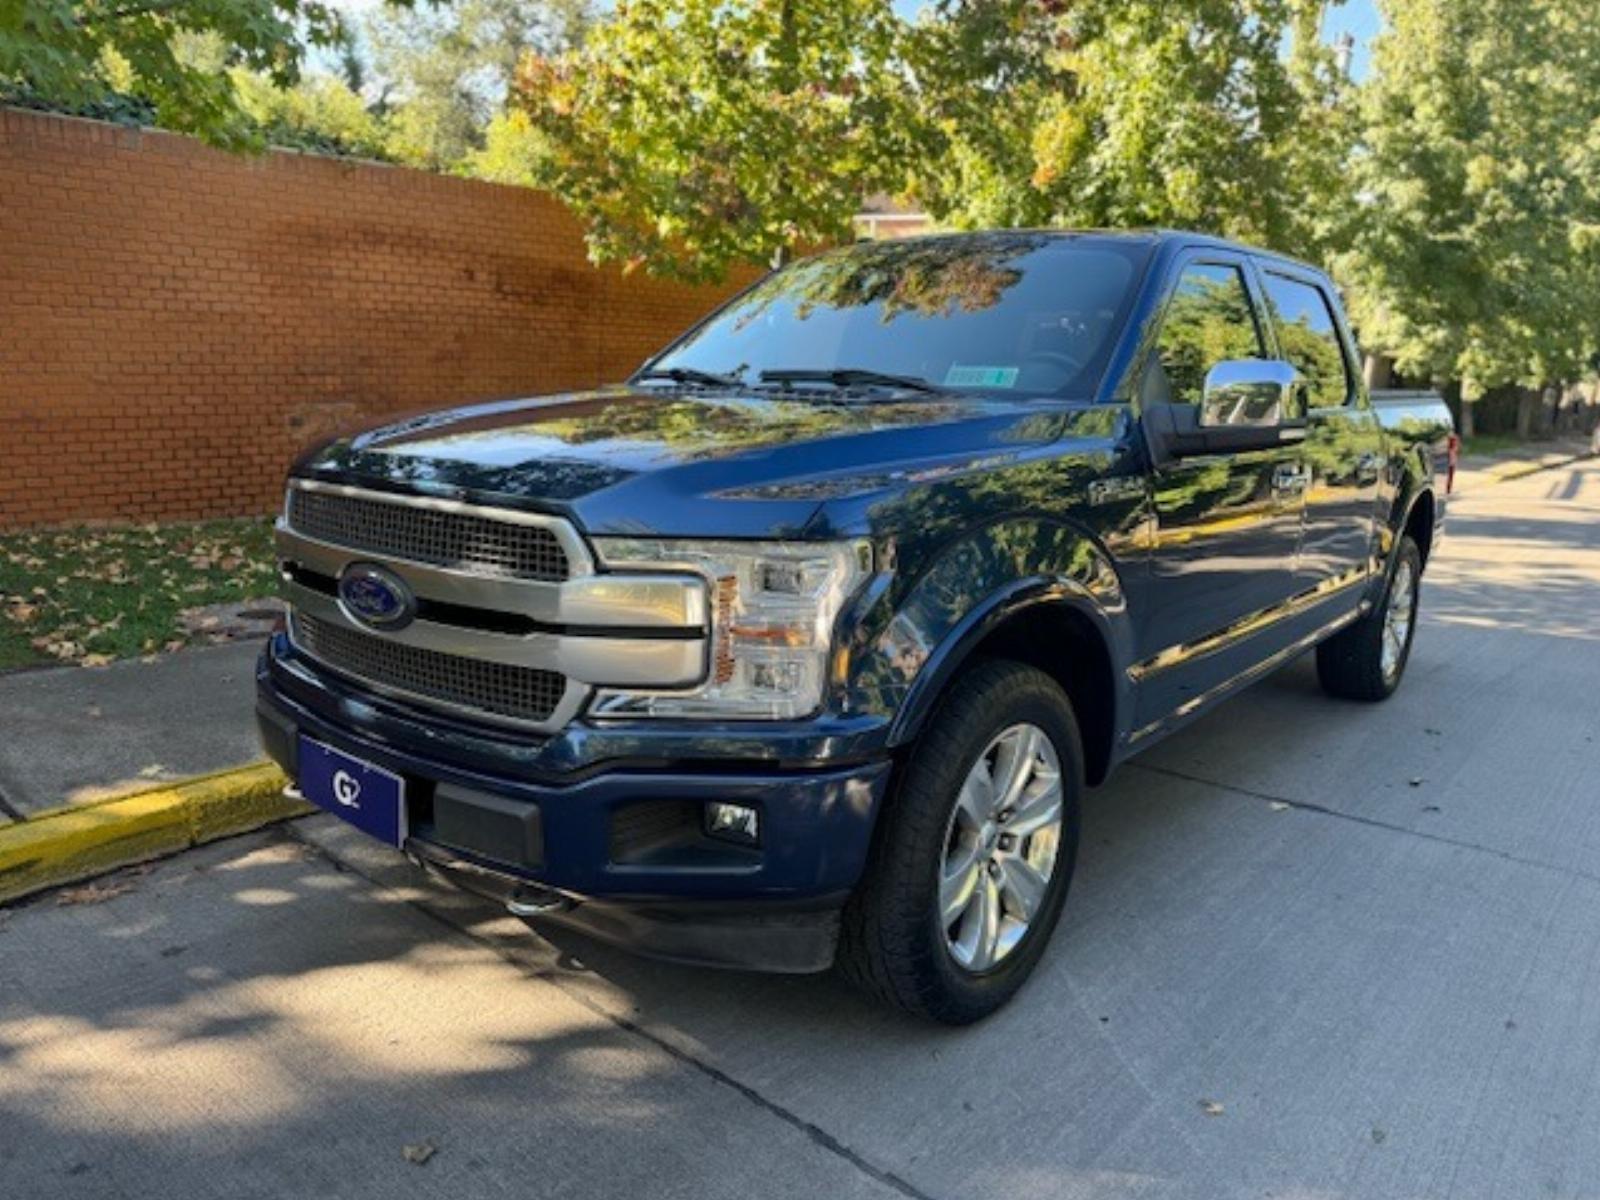 FORD F-150 LIMITED 3.5 Ecoboost 4WD 2018 Facturable - FULL MOTOR